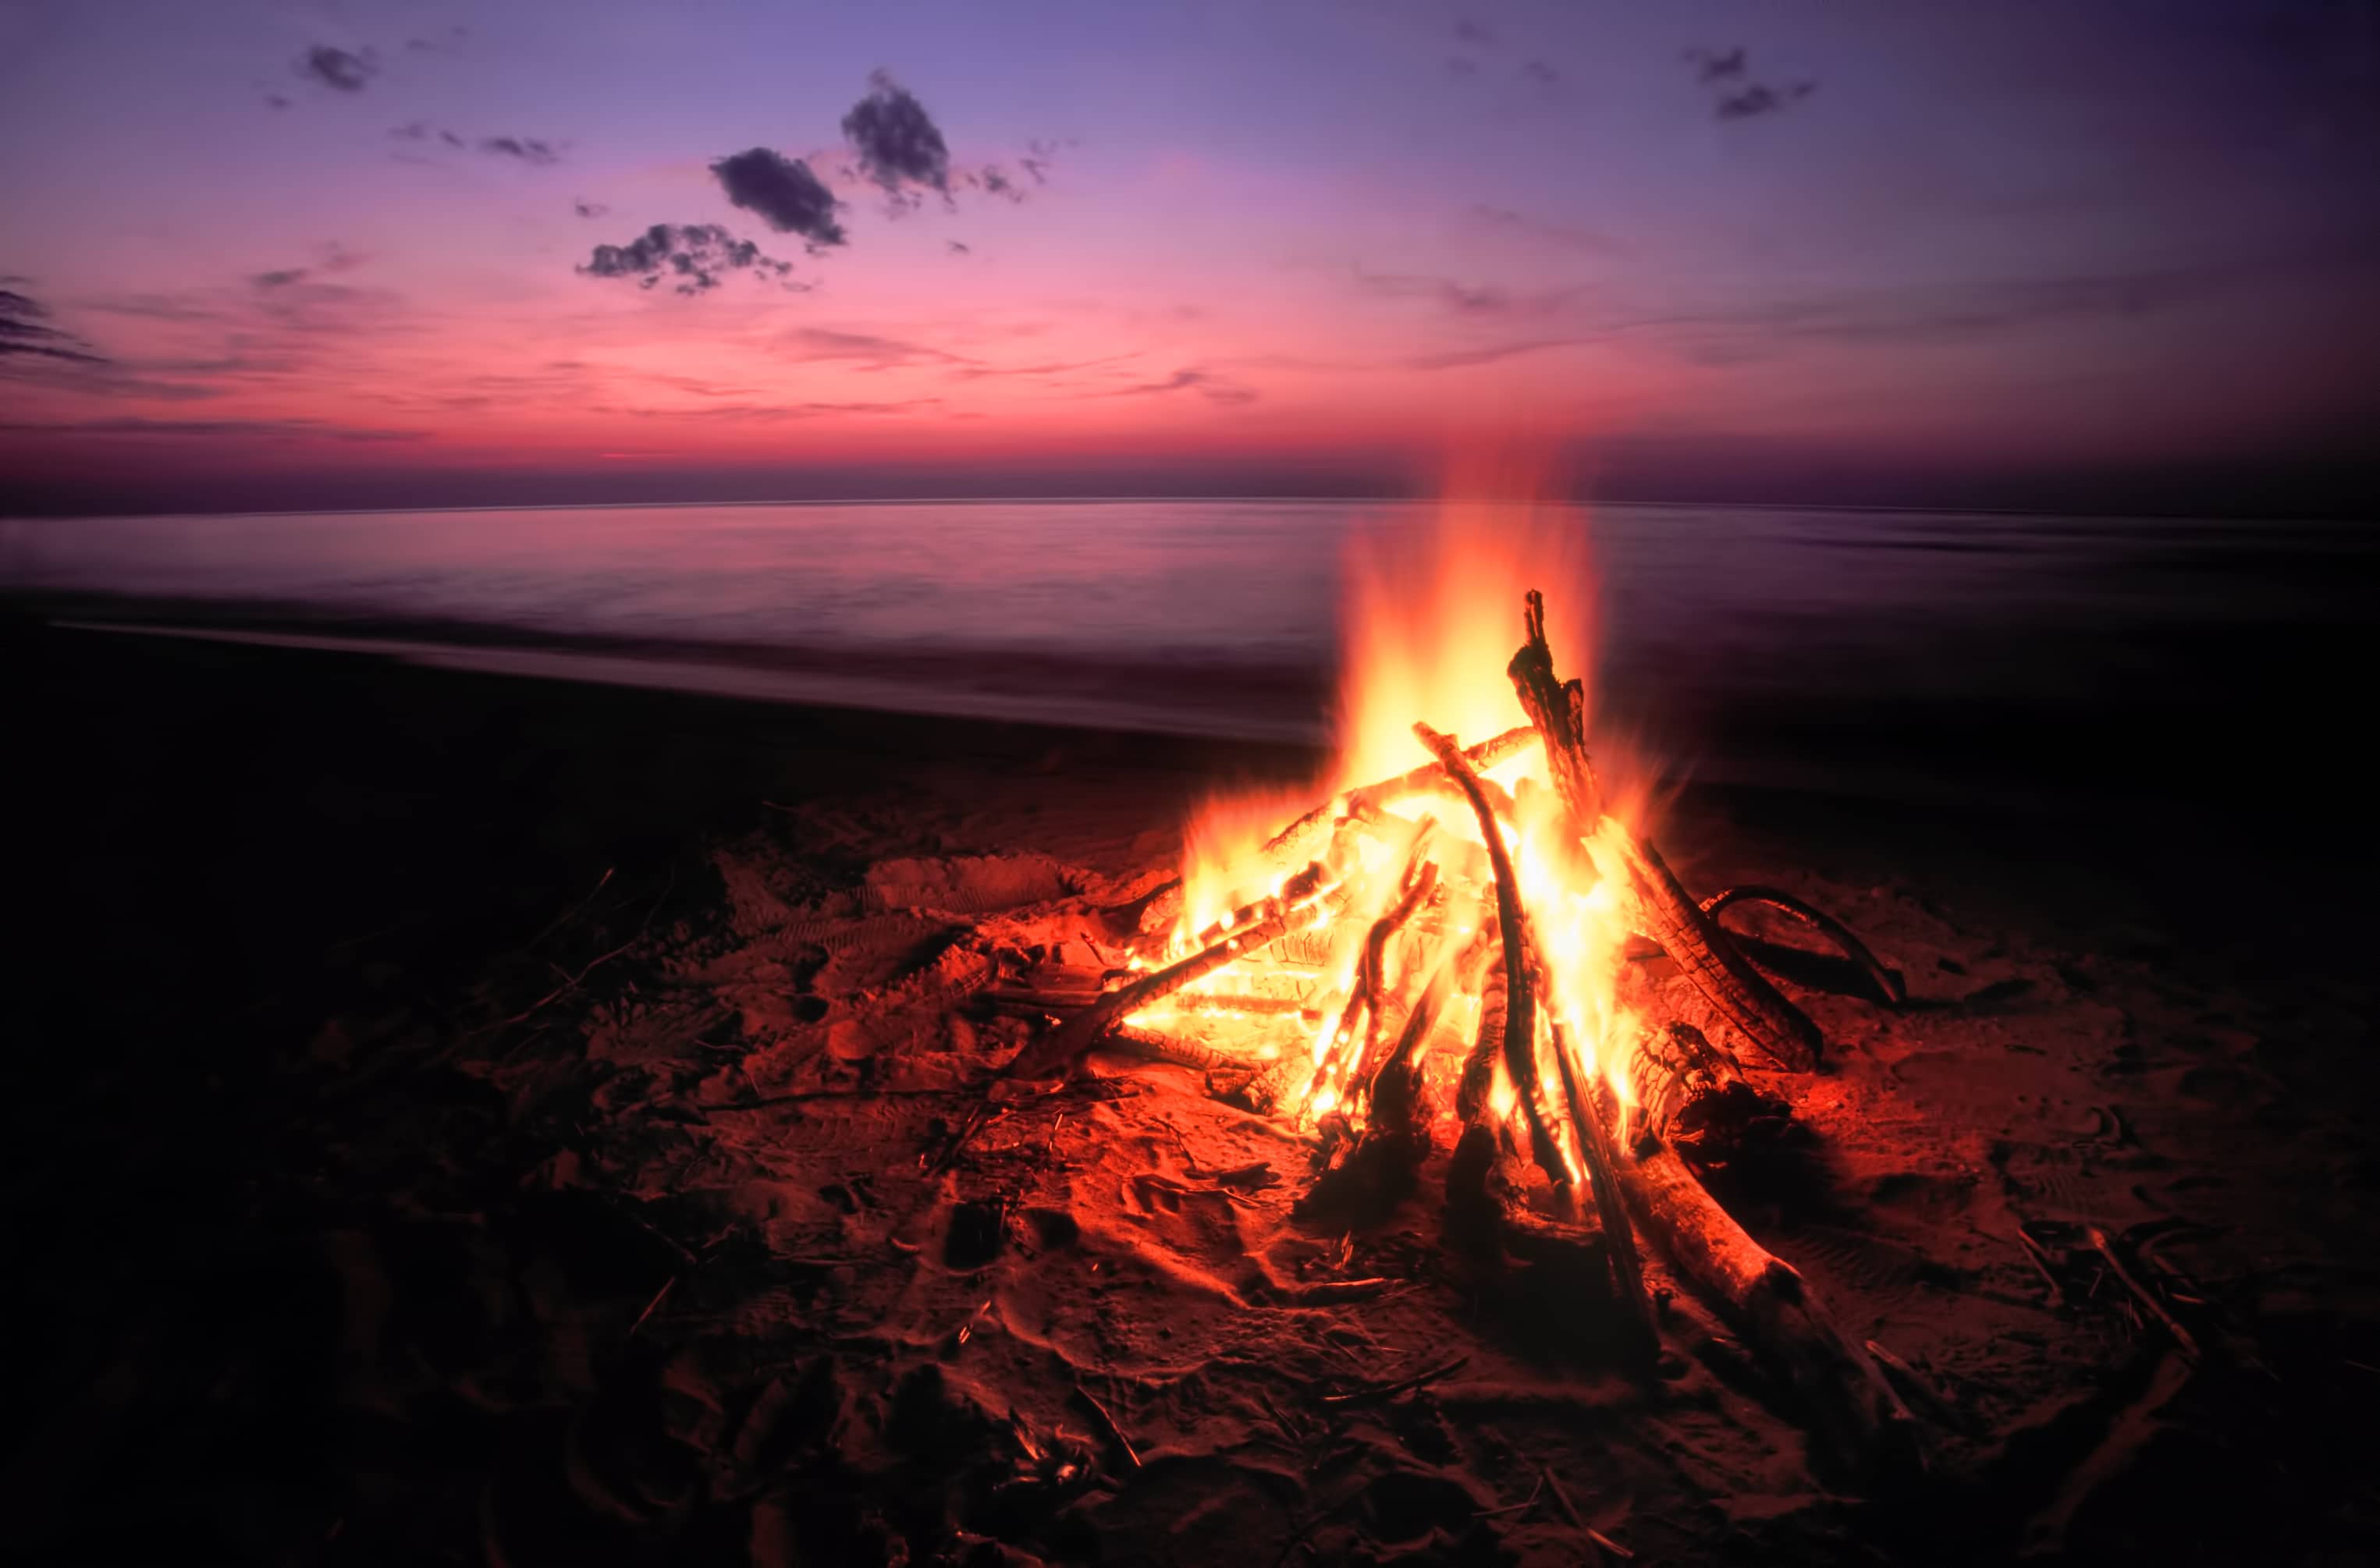 Blazing campfire at sunset along the beautiful beach of Lake Superior in northern Michigan.